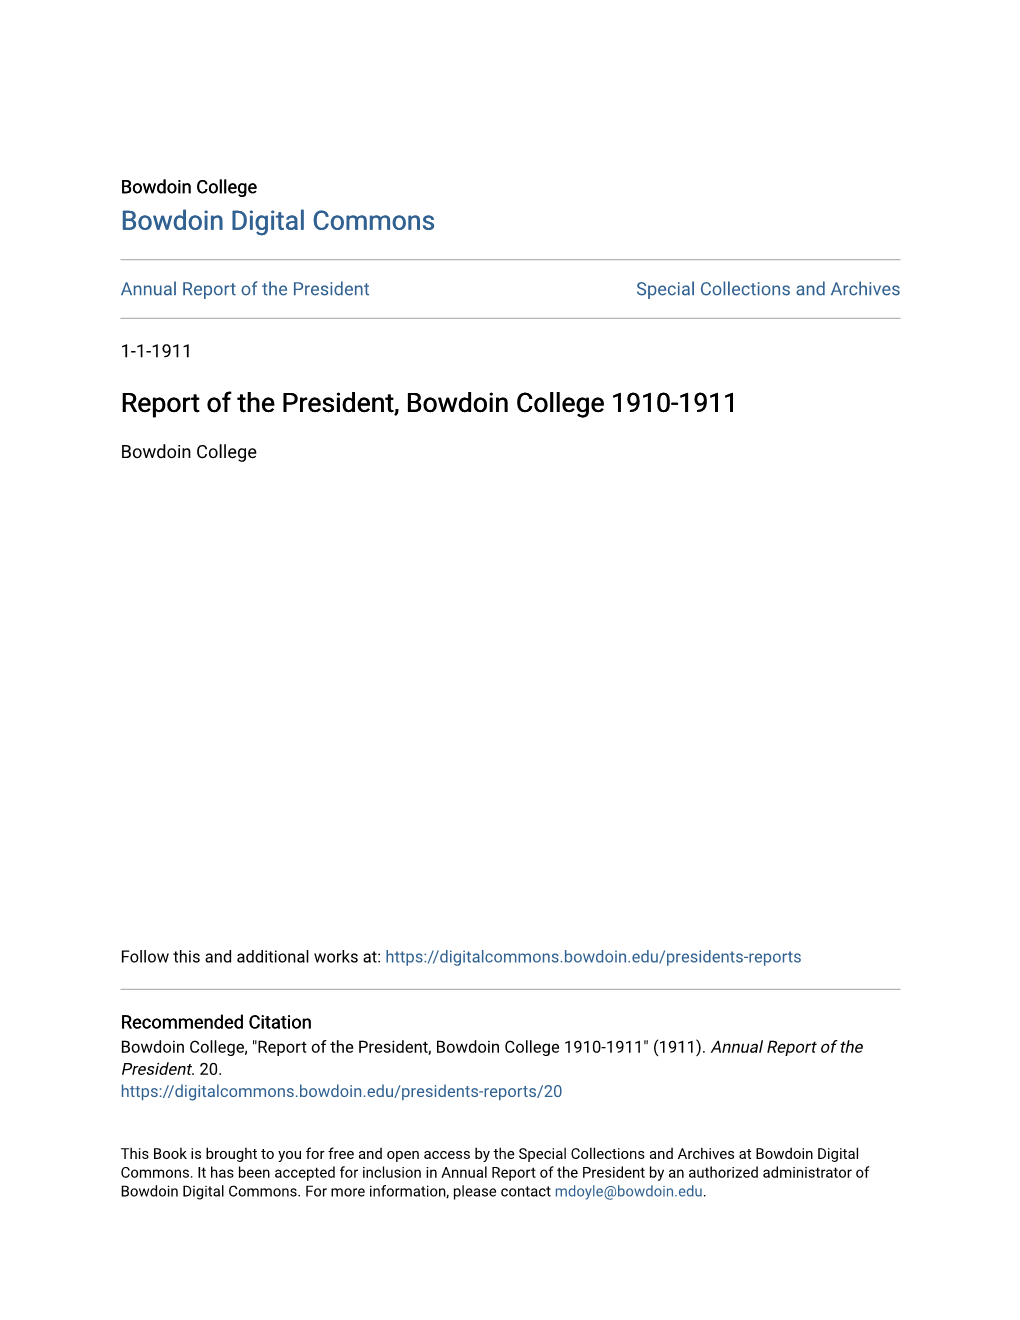 Report of the President, Bowdoin College 1910-1911